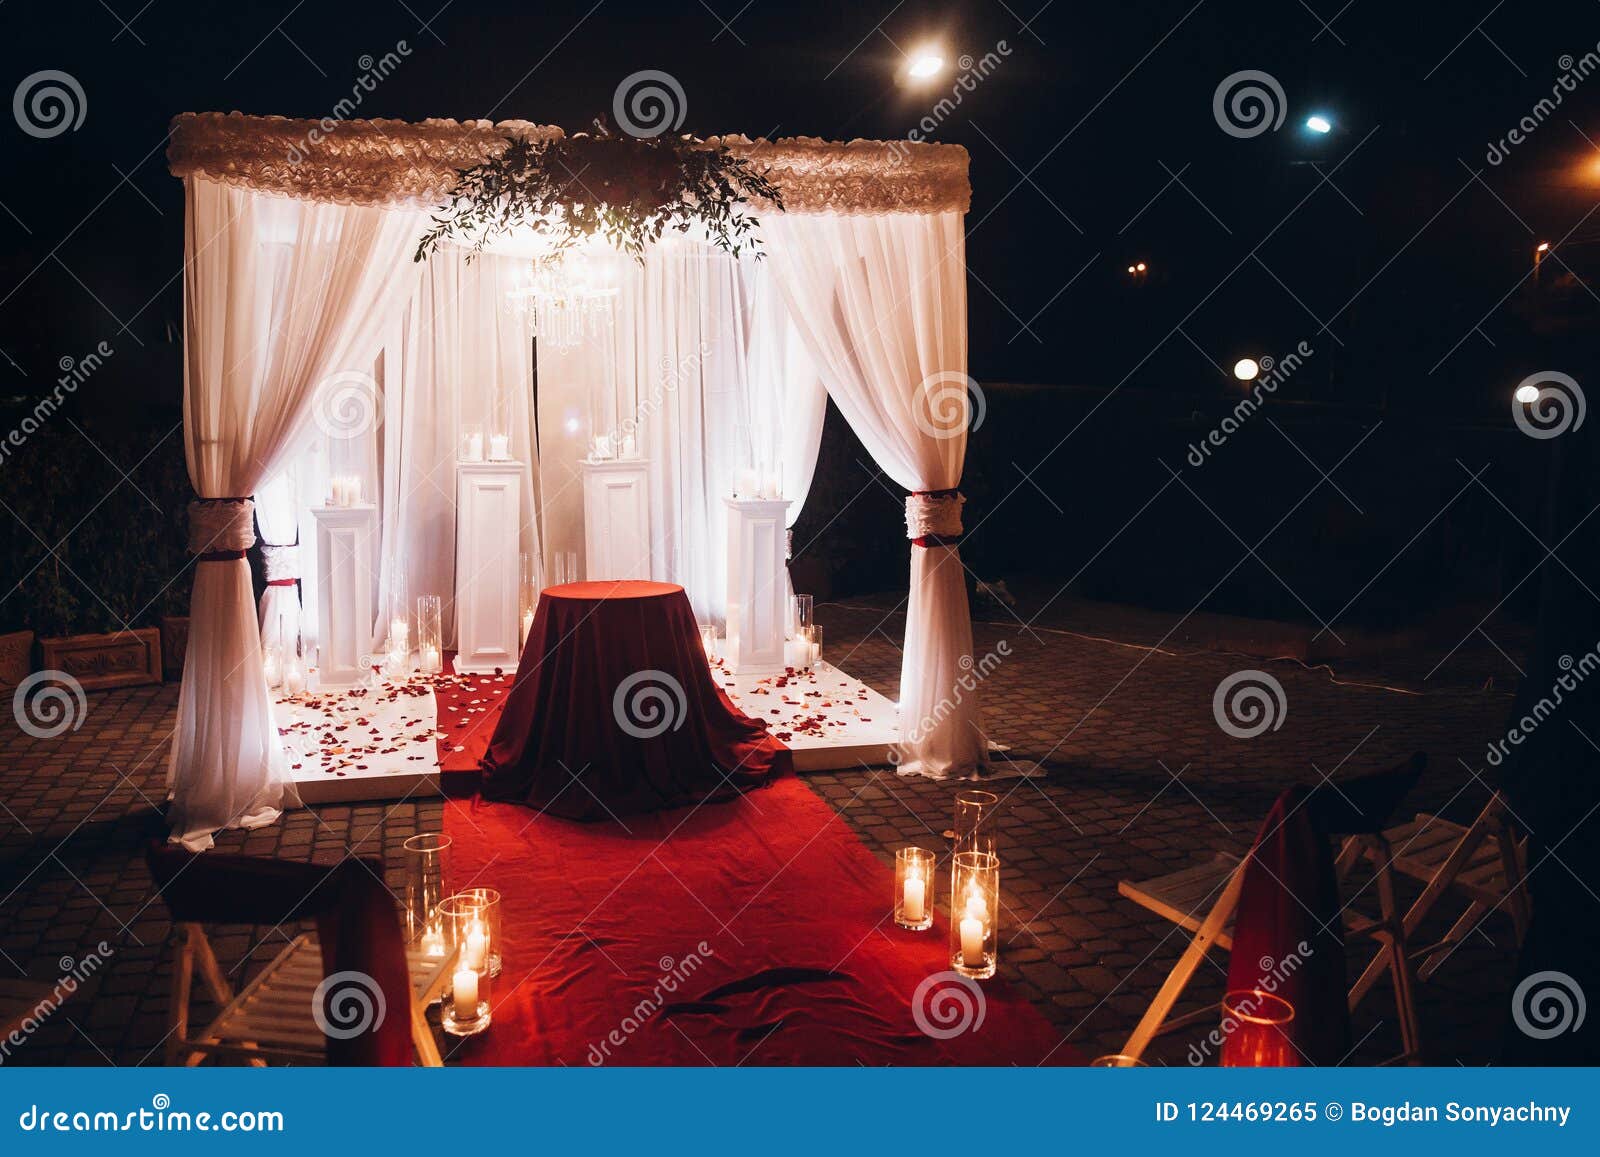 Wedding Evening Decor For Ceremony Venue Aisle With Candles